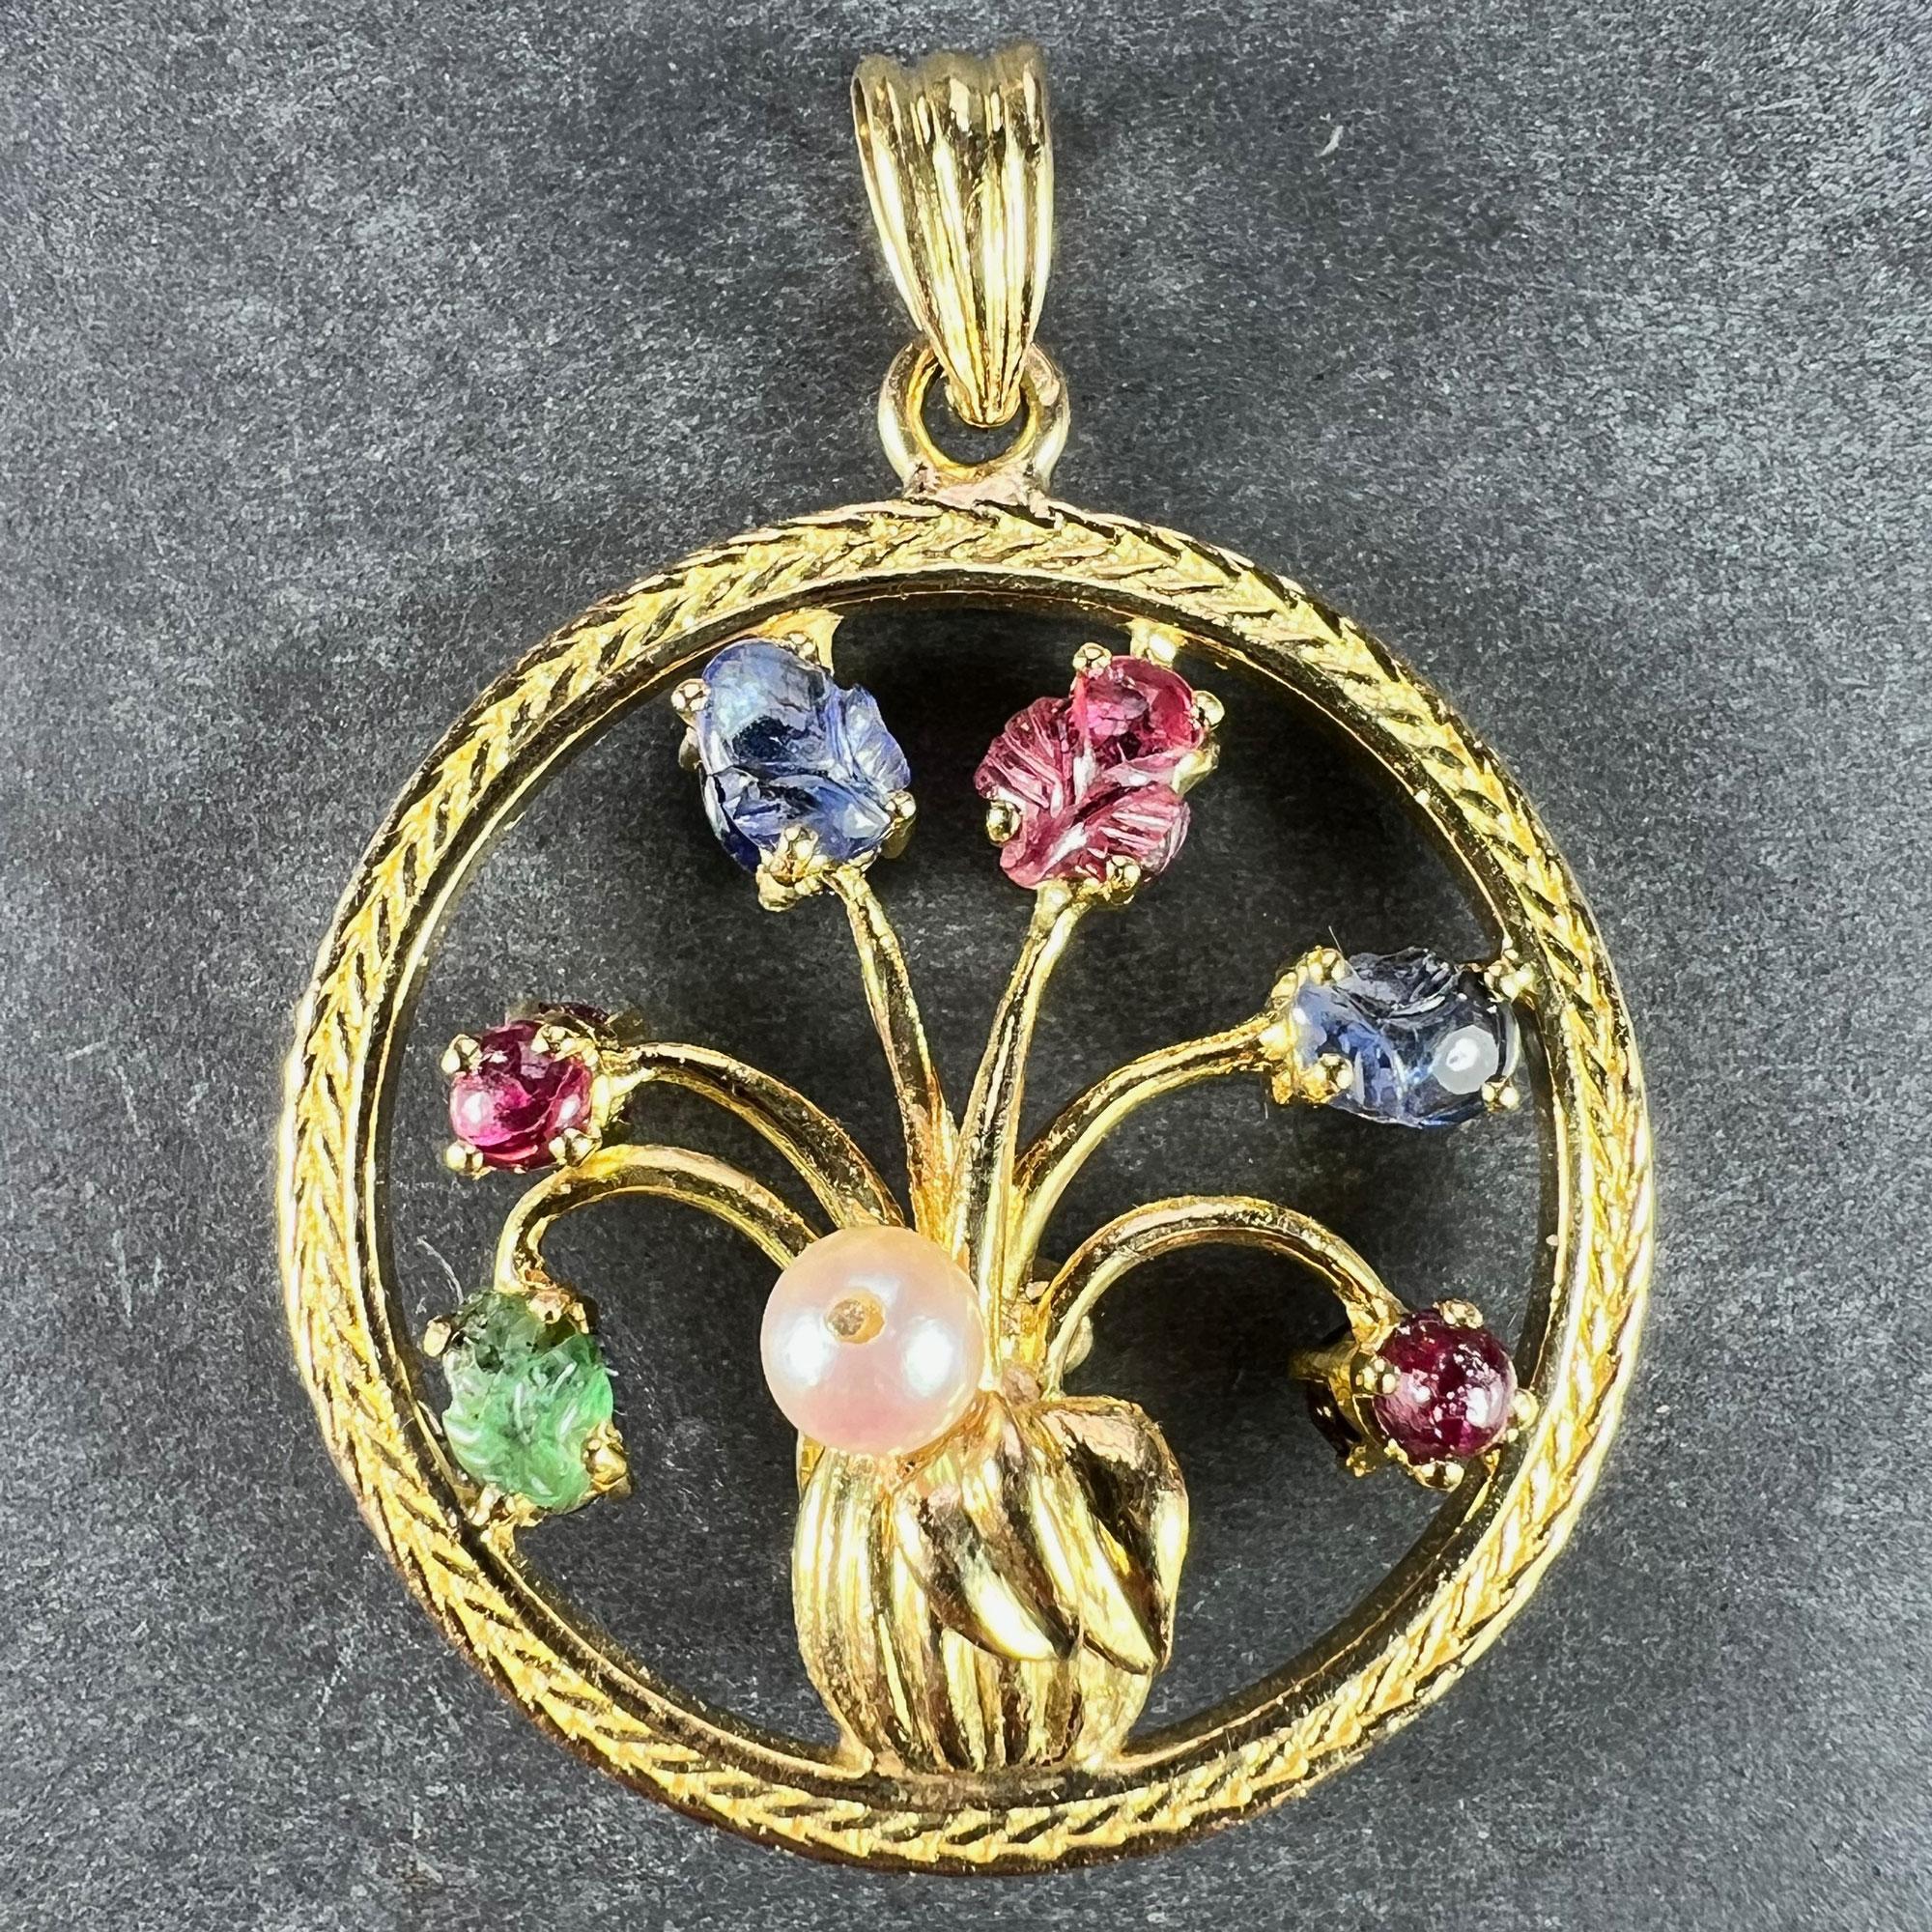 An 18 karat (18K) yellow gold double-sided pendant designed as a vase of flowers set to one side with a cultured pearl, a carved emerald, two ruby cabochons, two carved sapphires and a carved ruby. The other side is set with a turquoise cabochon,